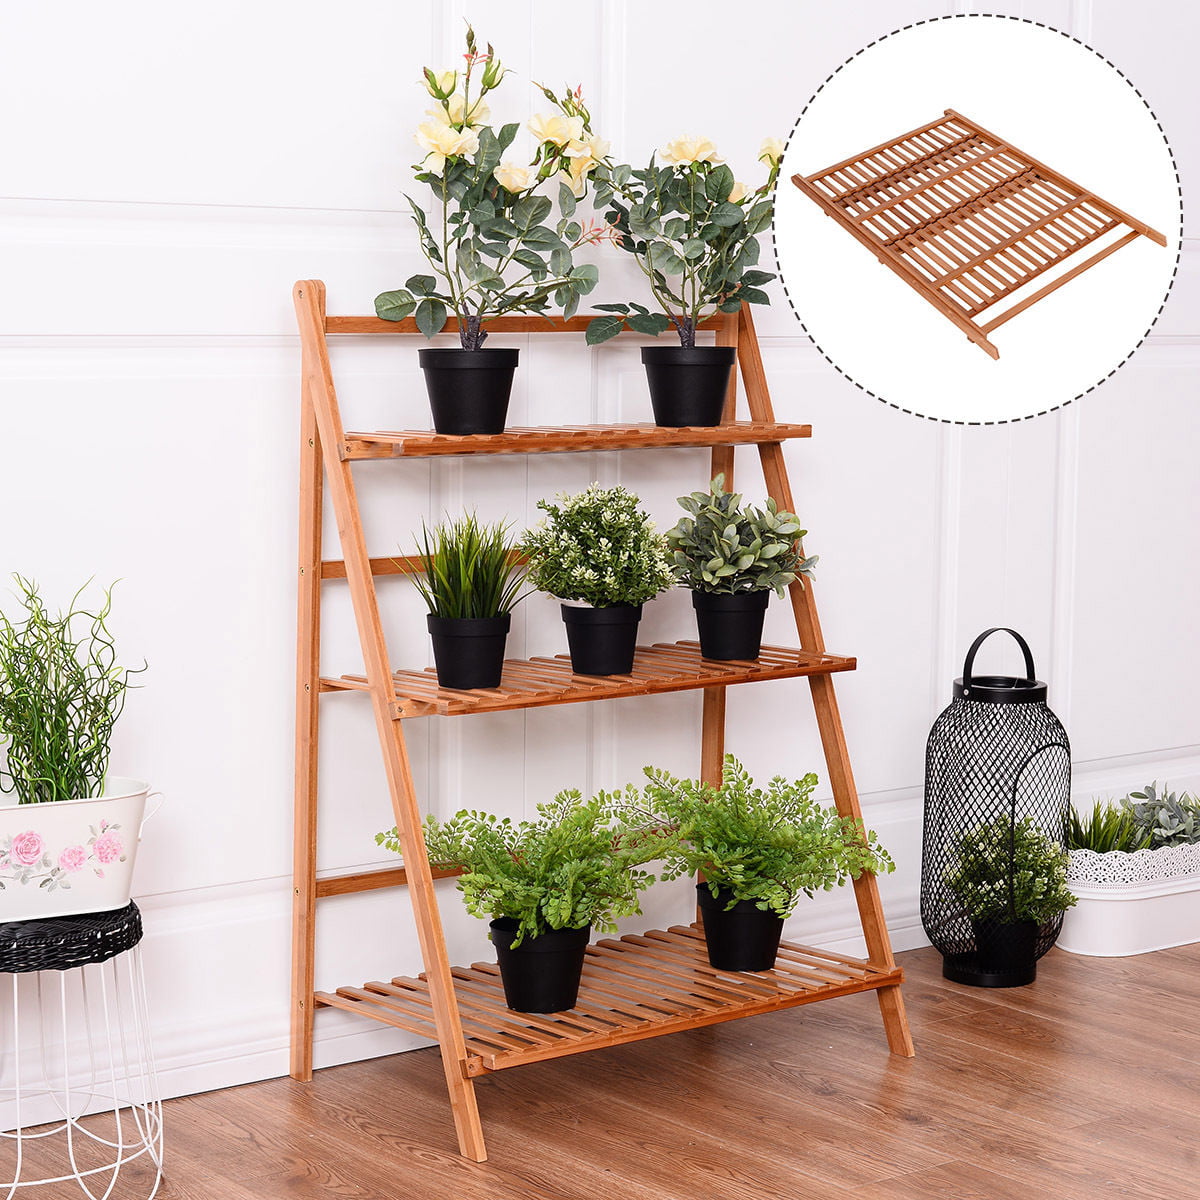 11 Pots Tiered Stands Flower Pot Holder Shelves 100% Bamboo Floor Rack Plant Shelf Flower Stands for Living Room Balcony and Garden Ohuhu Plant Stand Indoor Outdoor